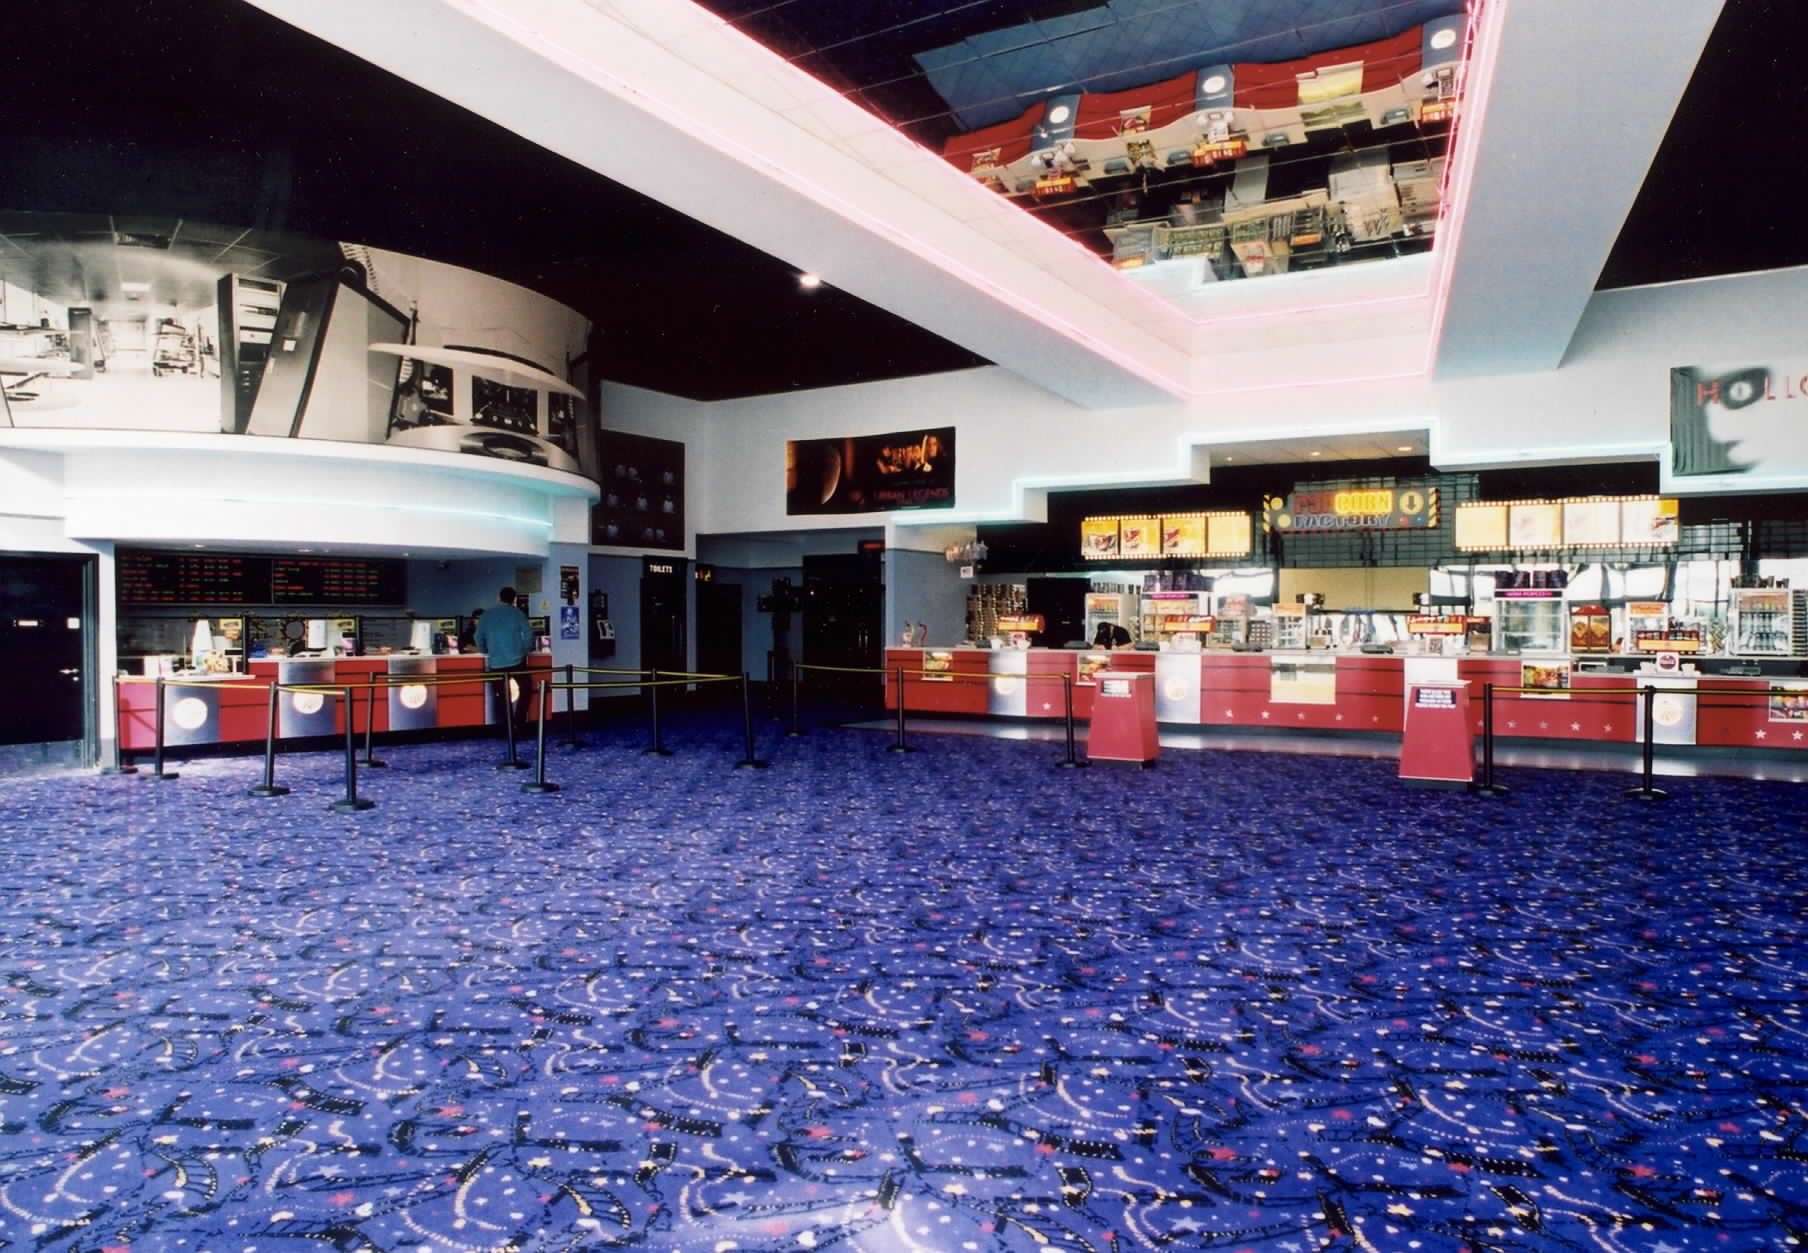 The main foyer at Ashford's Cineworld in December 2002 featuring its huge mirror on the ceiling